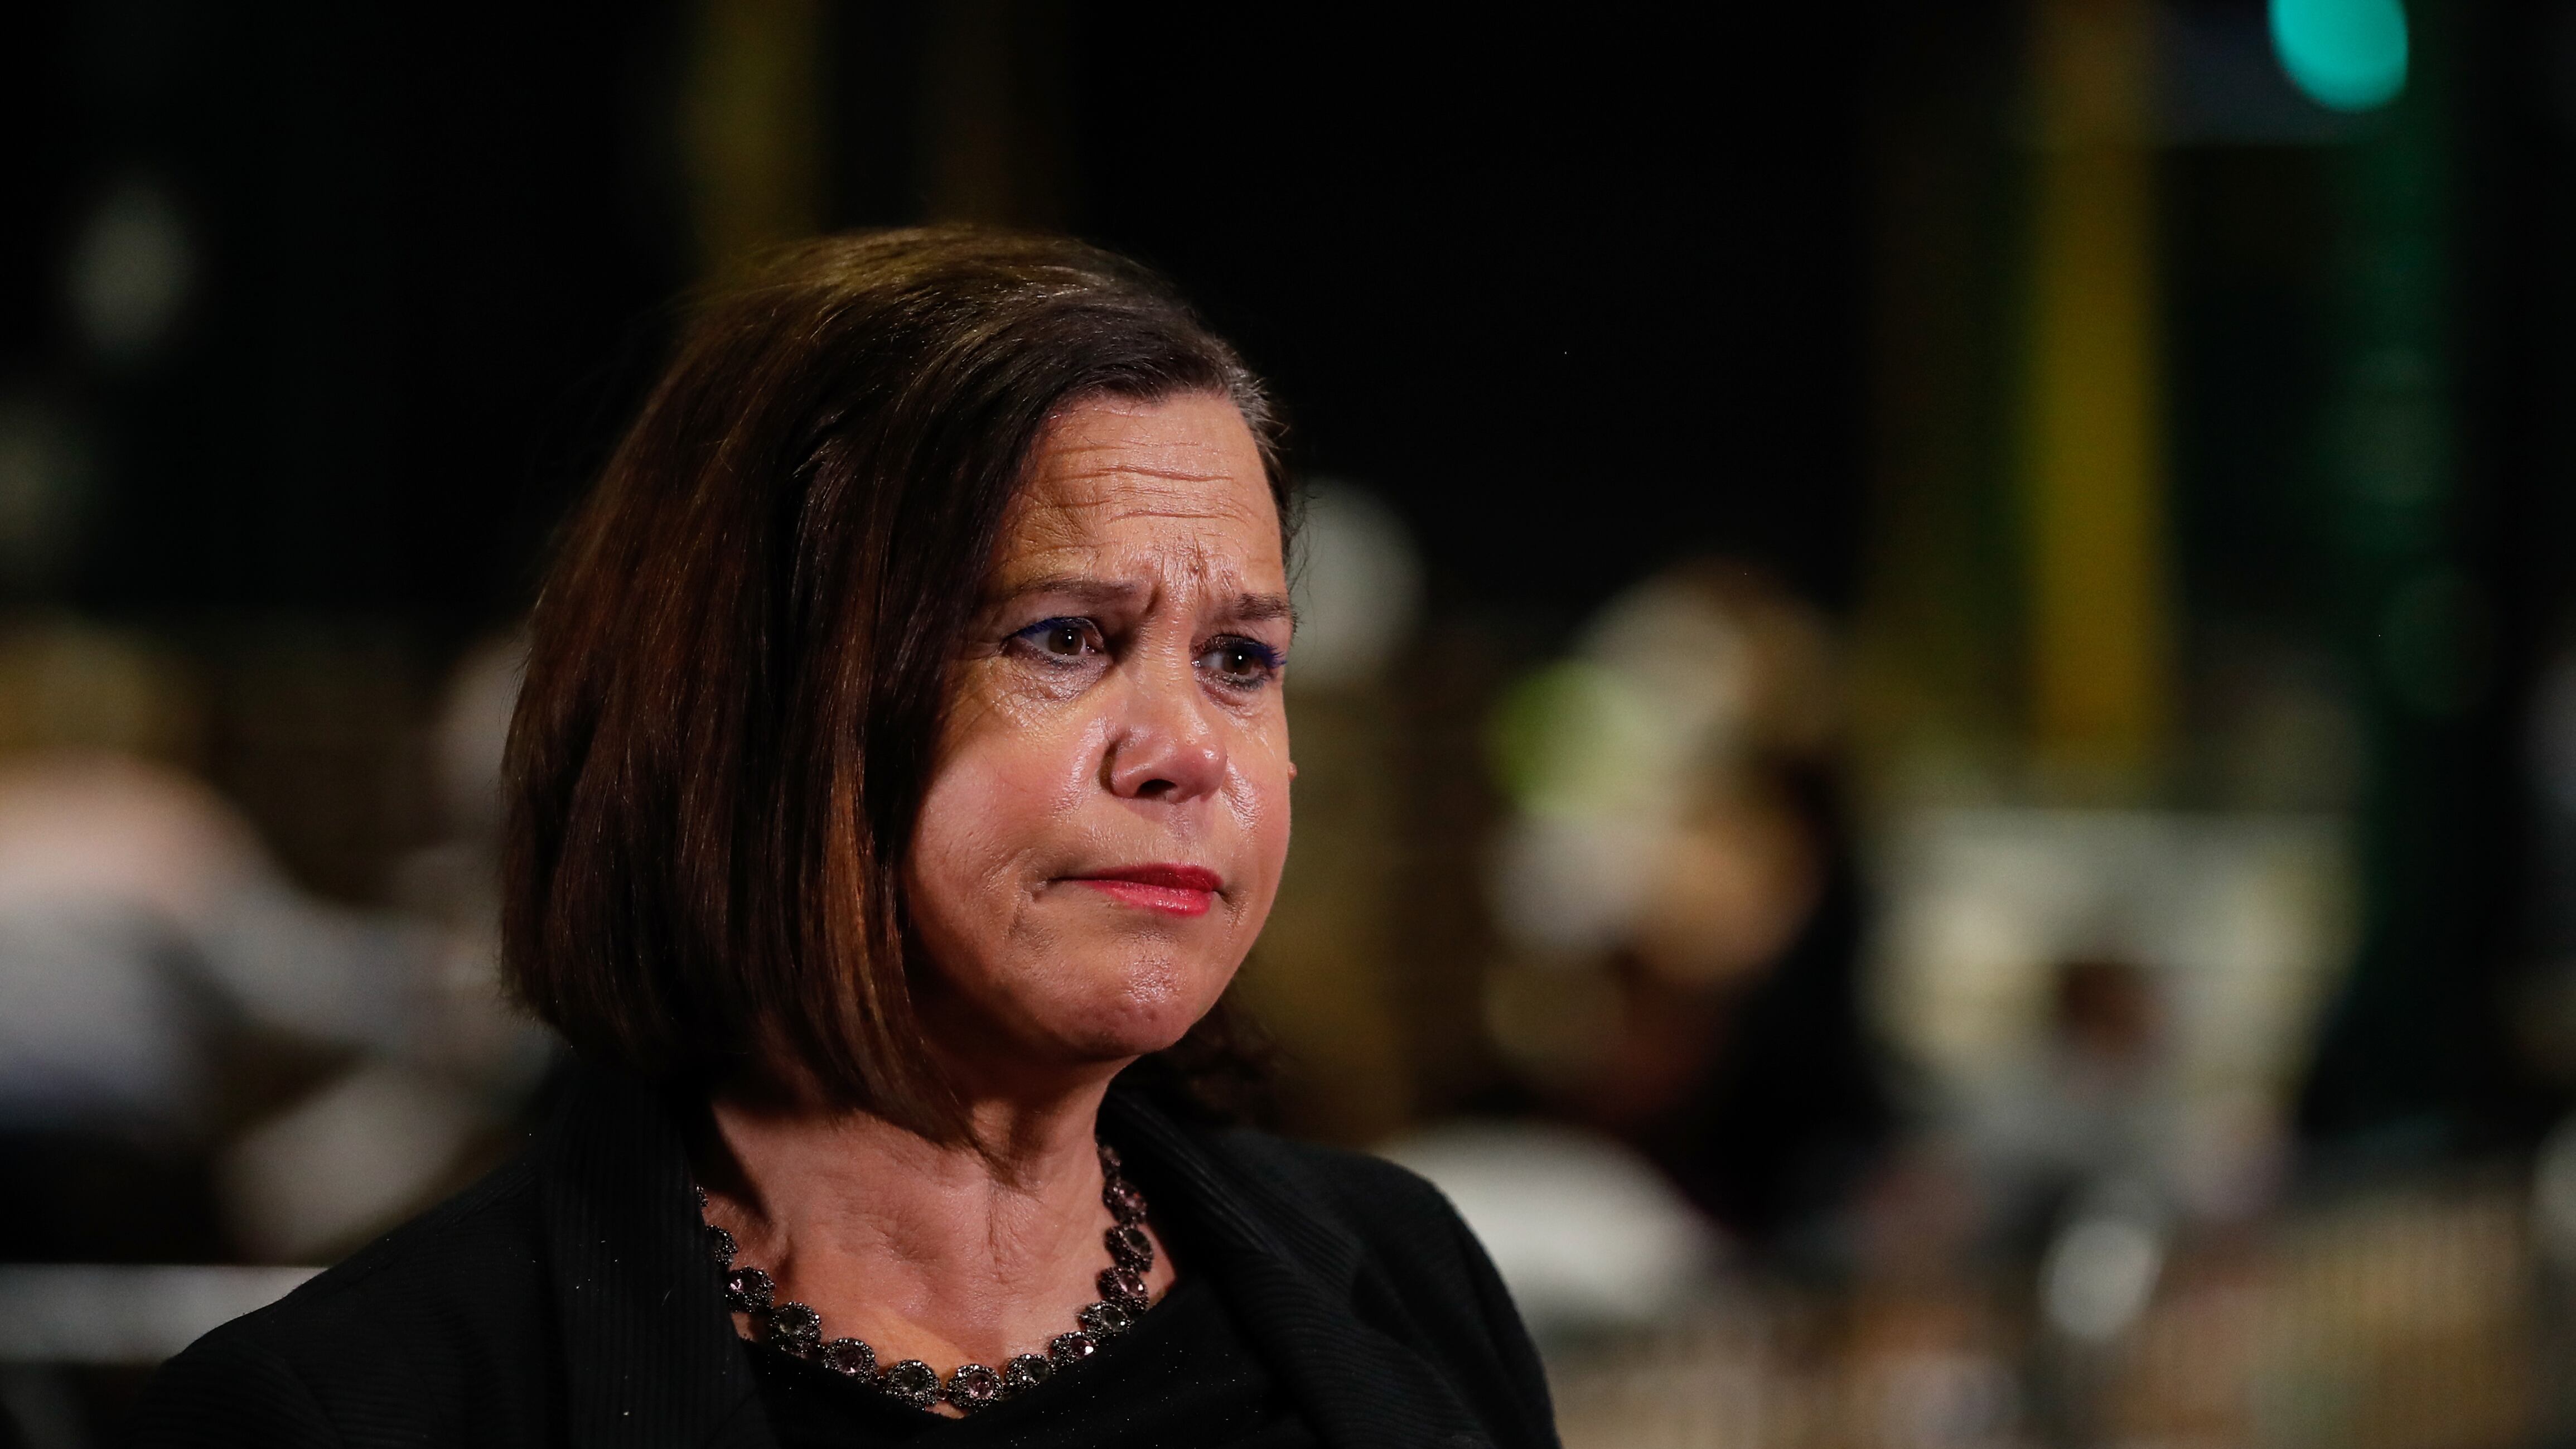 Sinn Fein leader Mary Lou McDonald is facing questions over her stewardship of the party